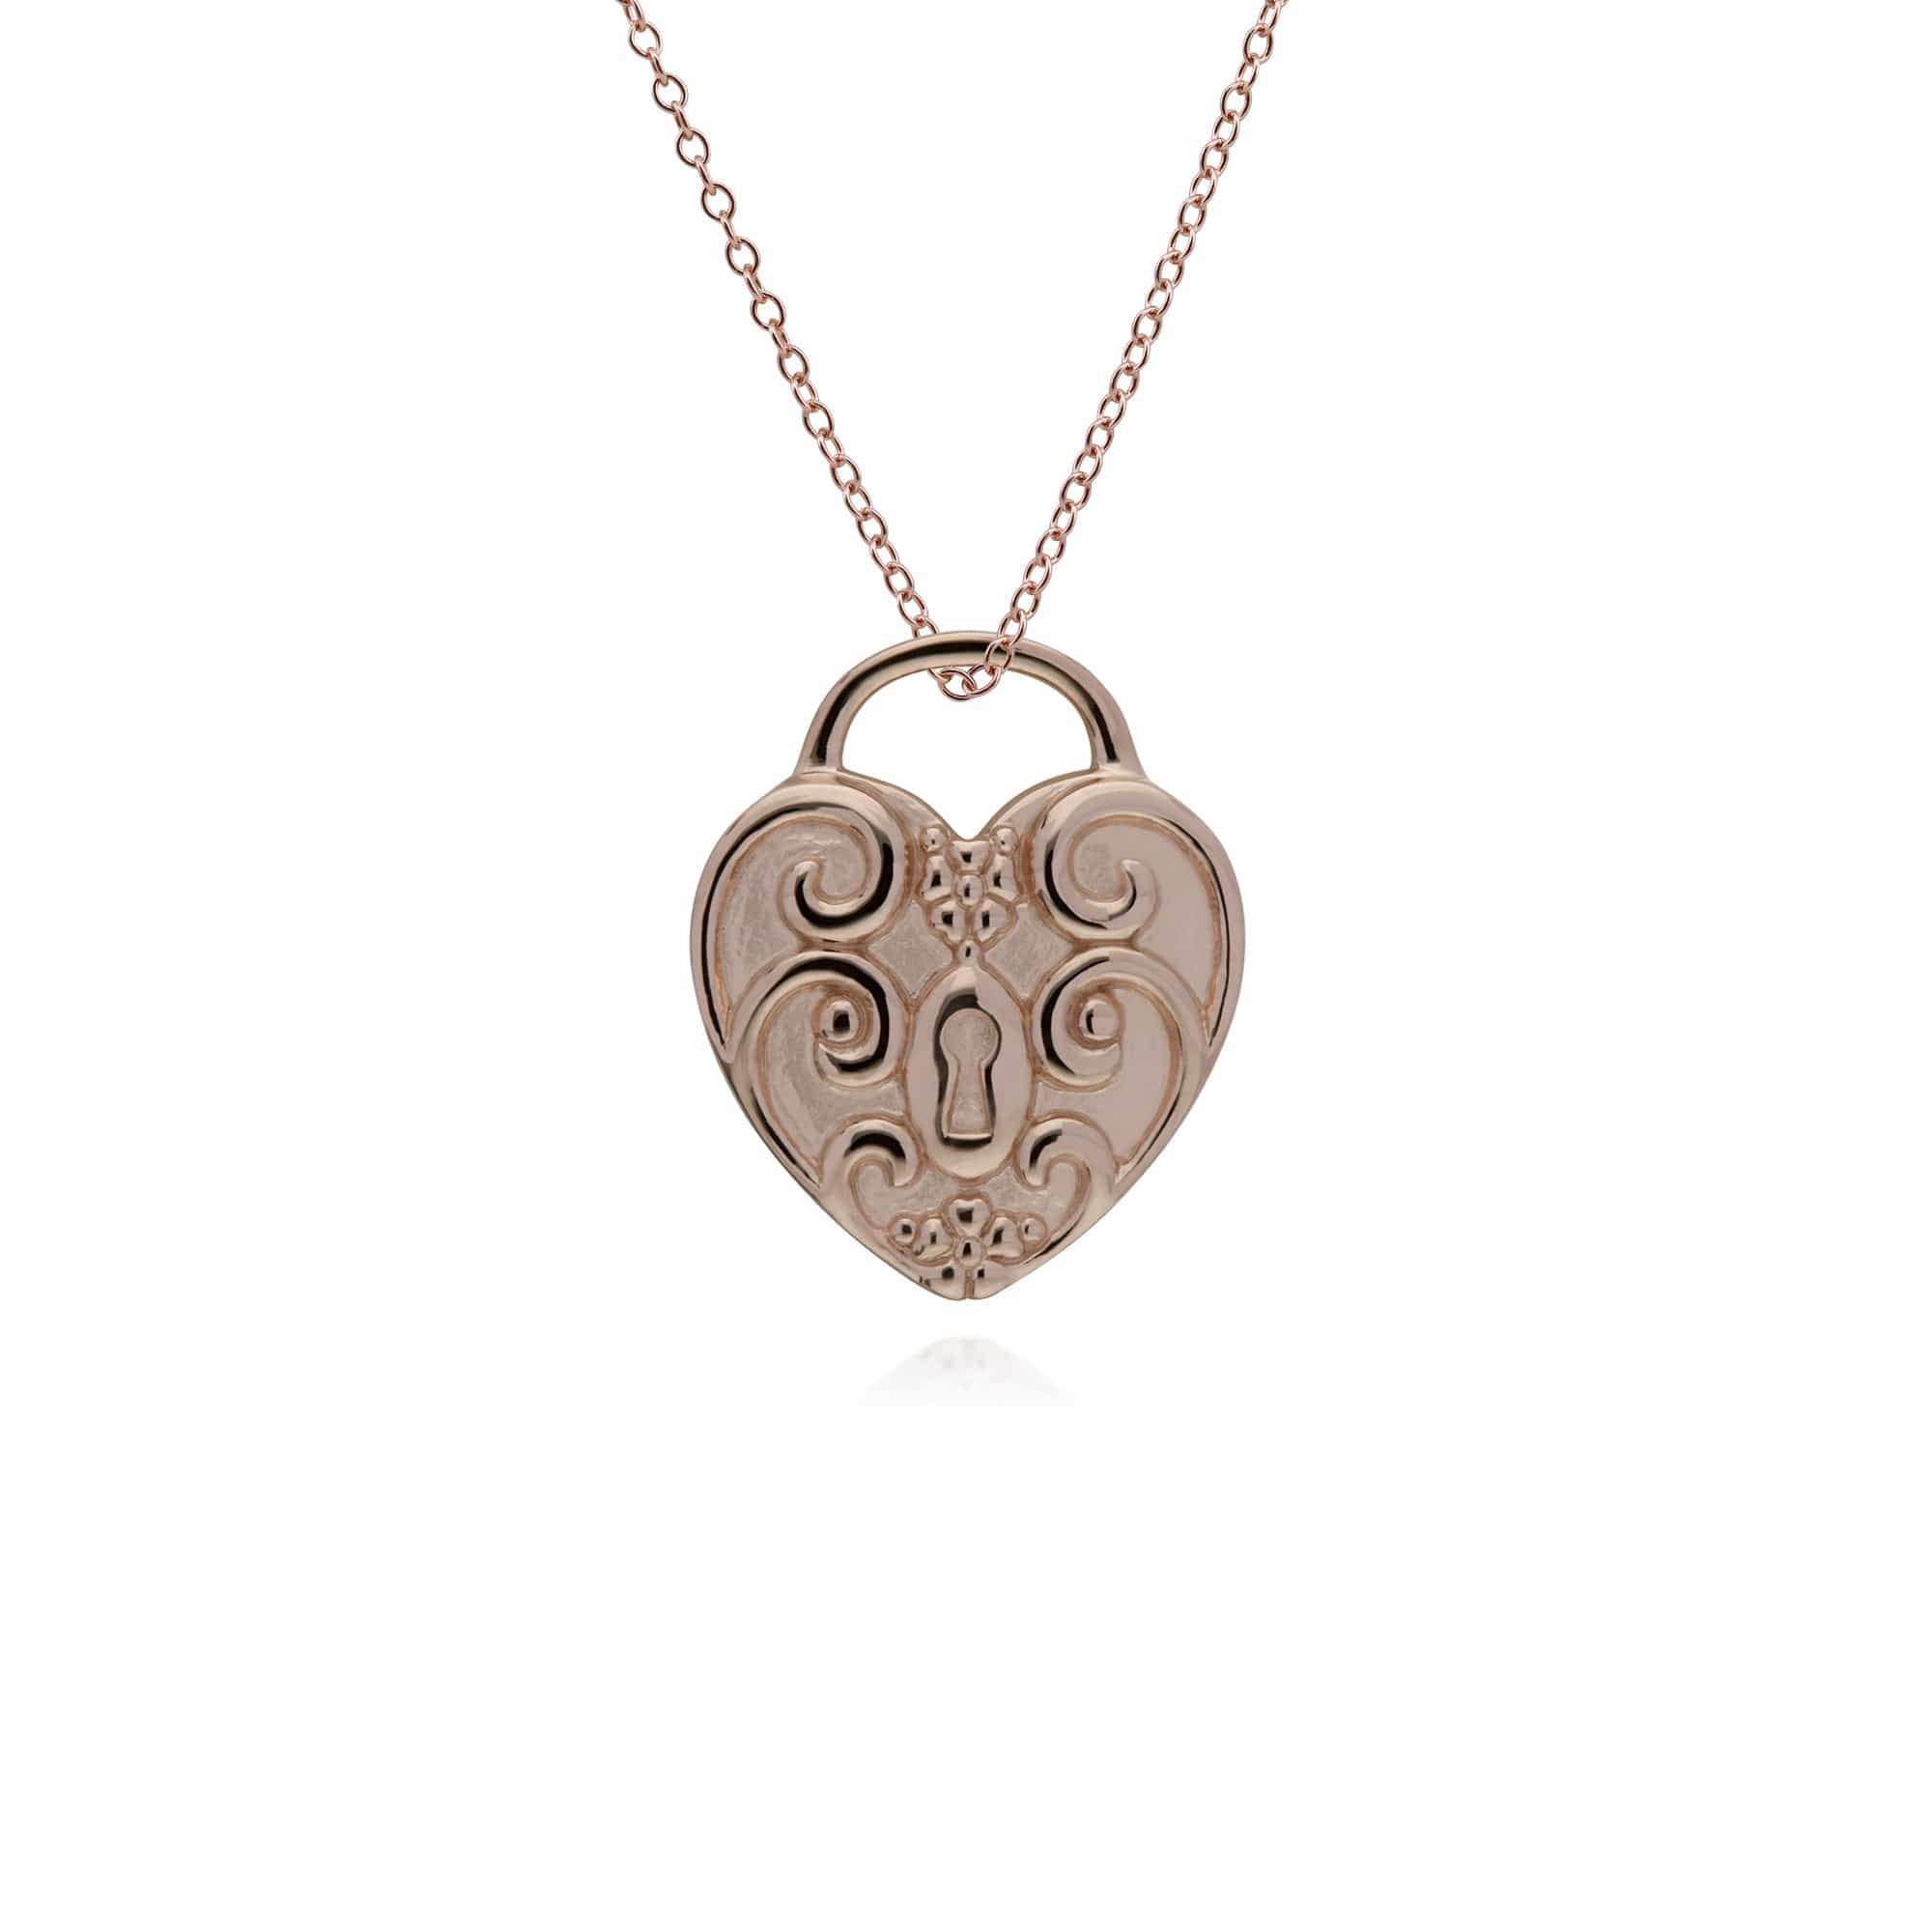 270P026702925-270P026501925 Classic Swirl Heart Lock Pendant & Opal Big Key Charm in Rose Gold Plated 925 Sterling Silver 3